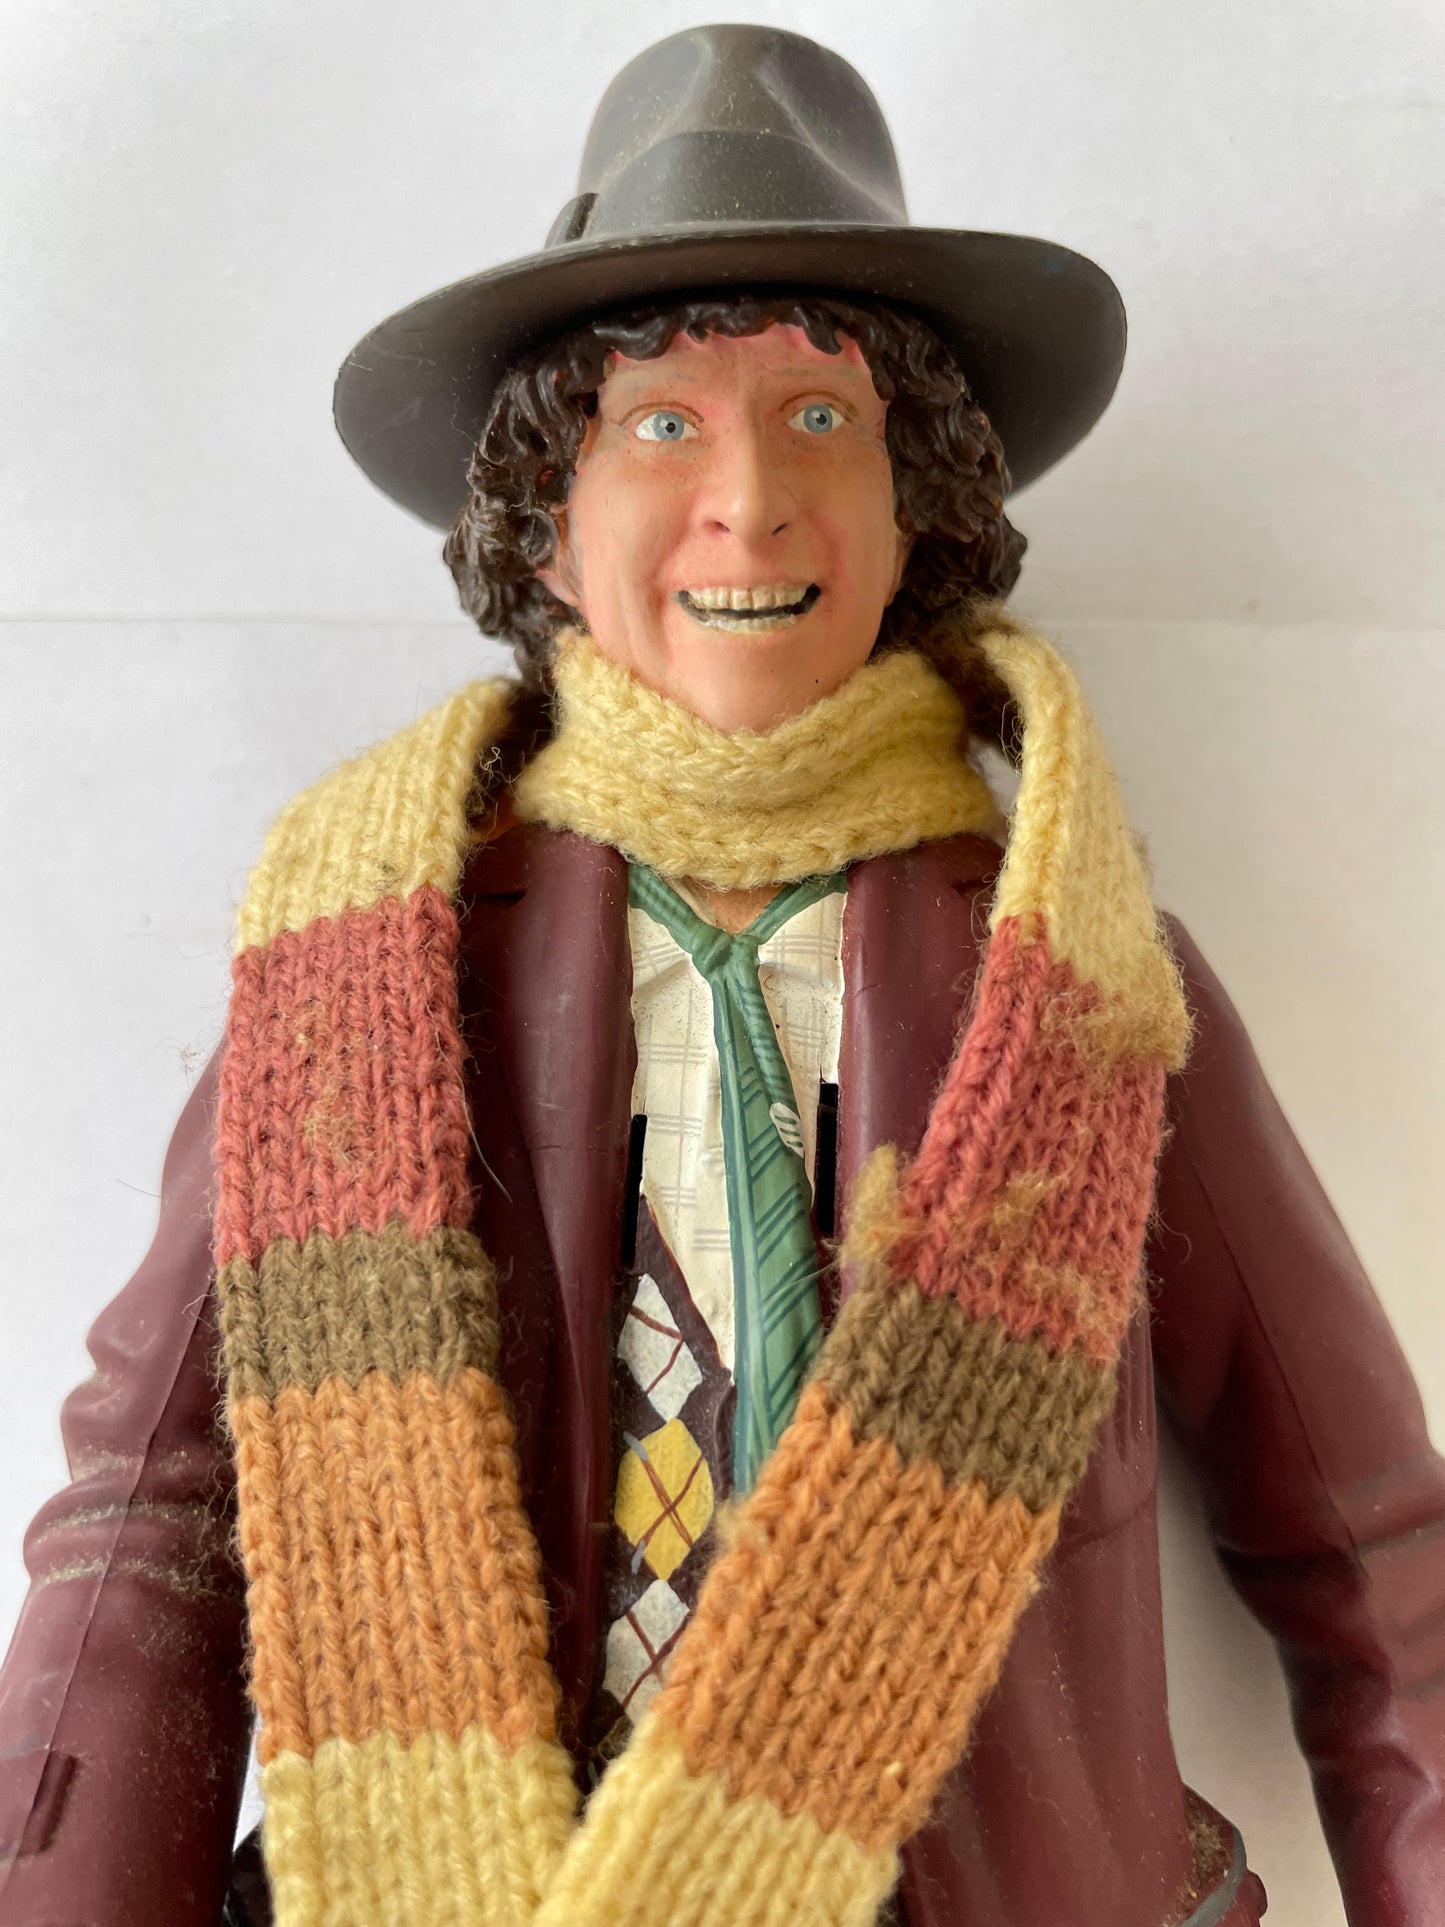 Vintage Product Enterprise 2003 Dr Who Product Enterprise Talking 4th Doctor Action Figure - Fully Working